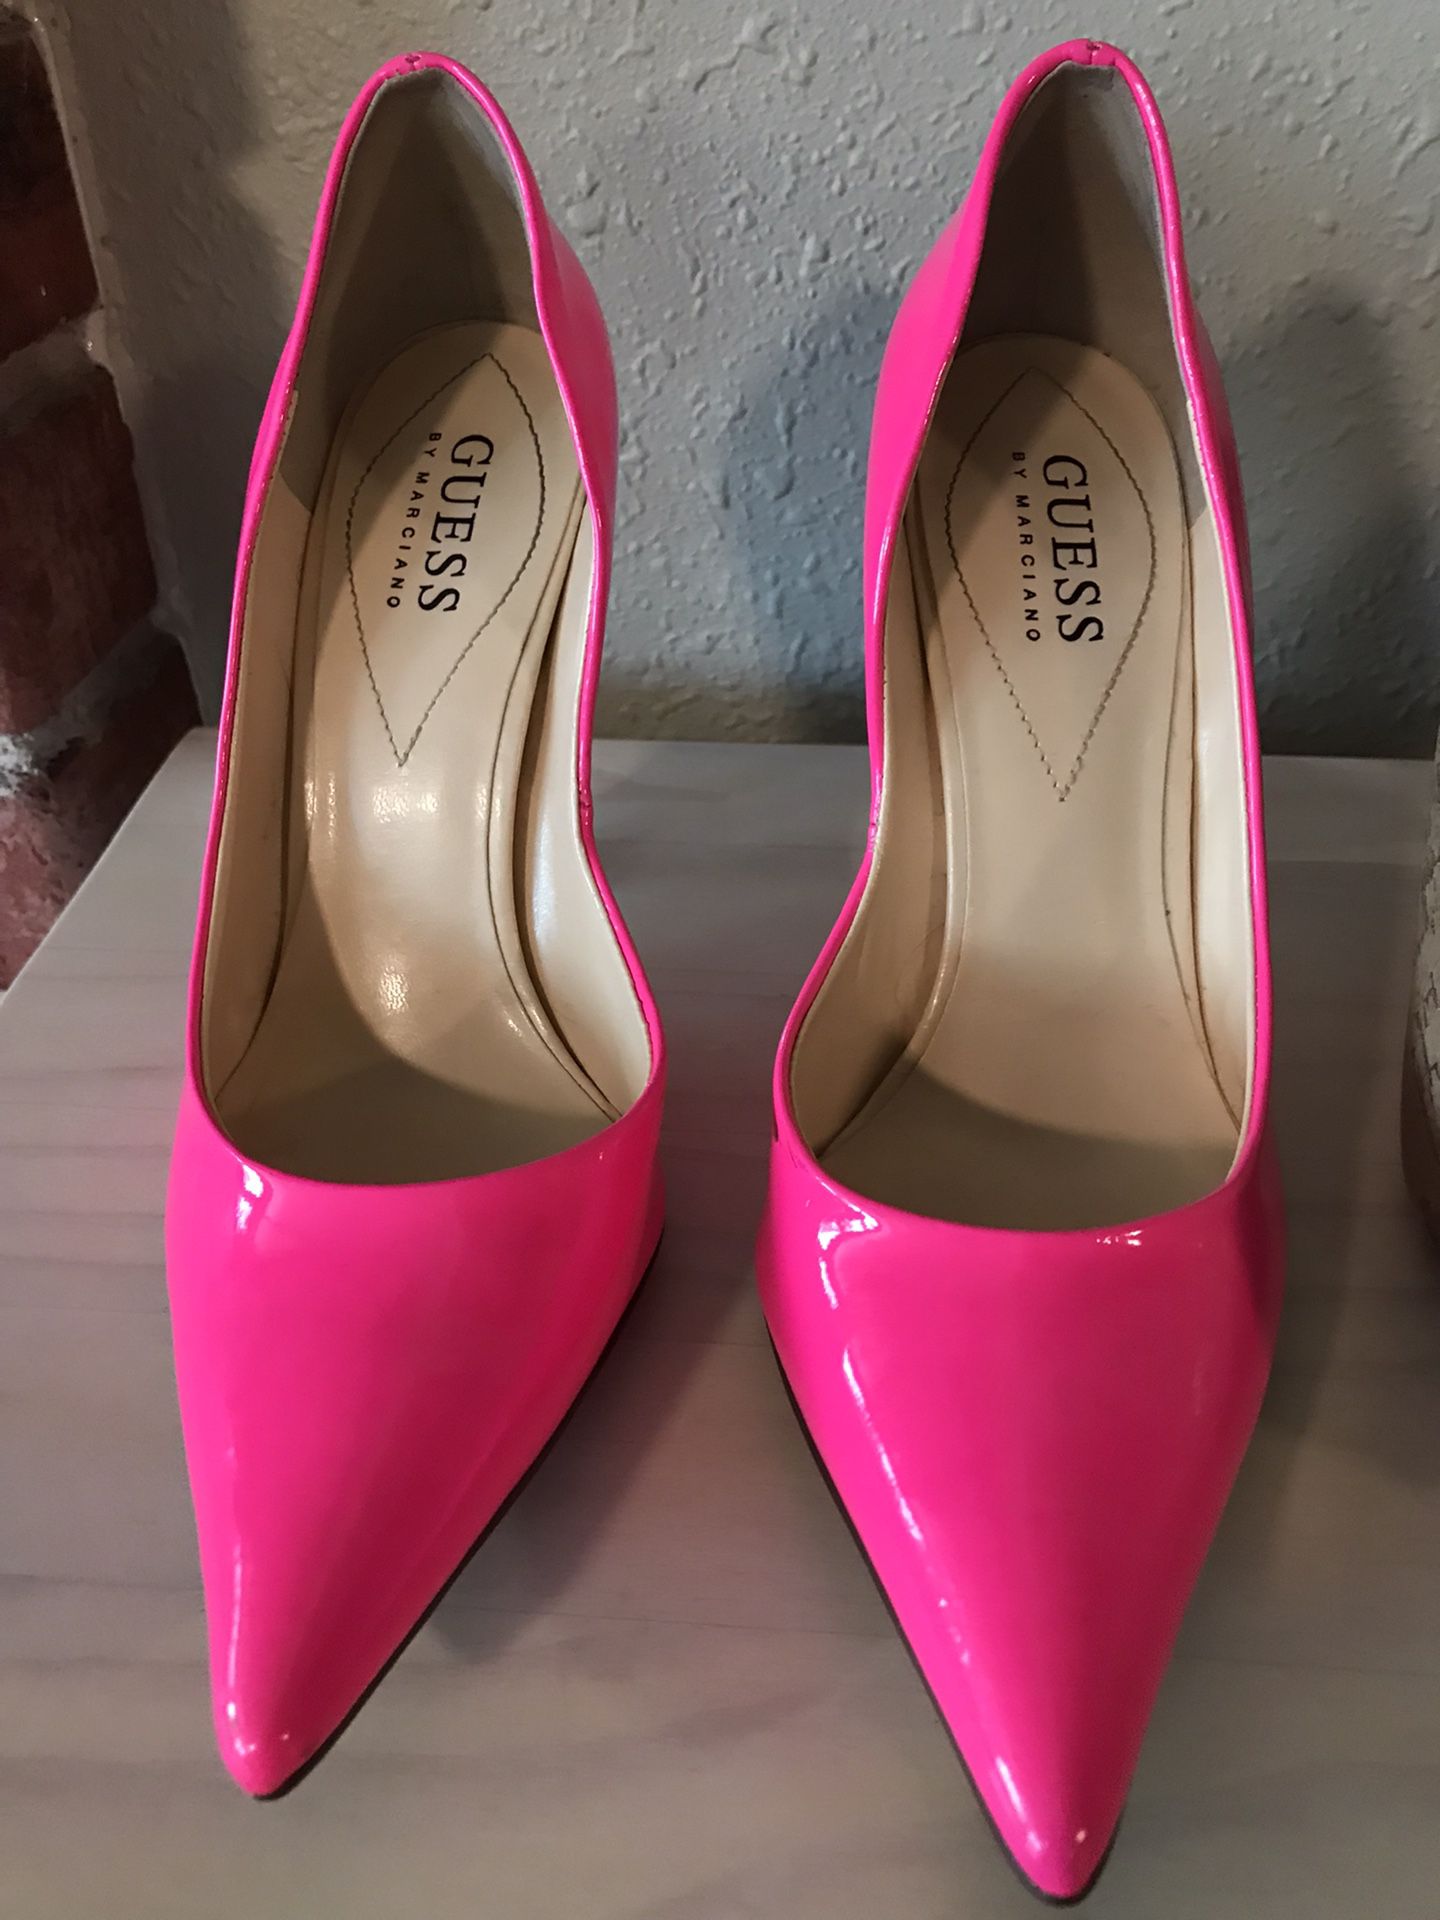 Hot pink Guess Heels by Marciano  👠 Size 6